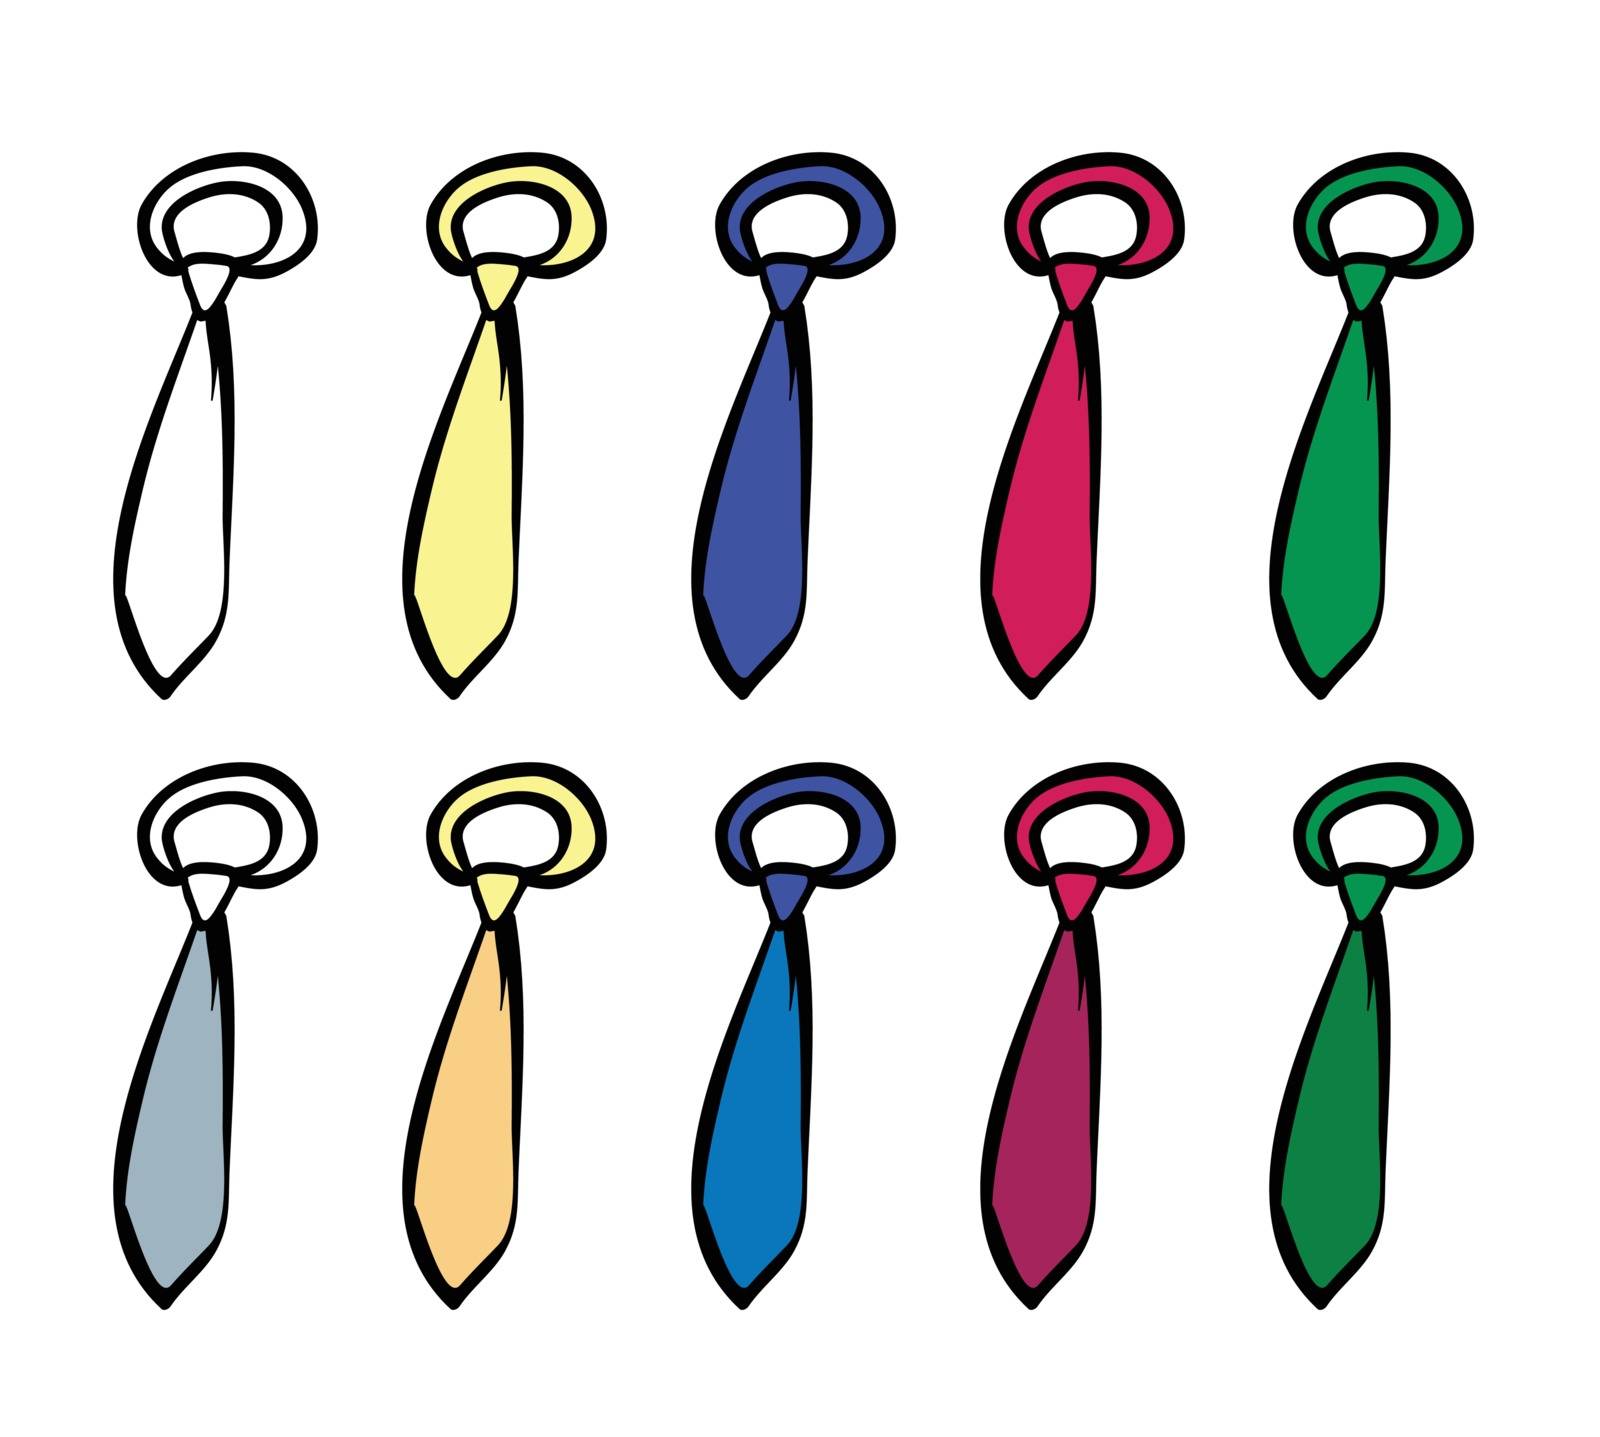 Illustration of ties in different colors on a white background